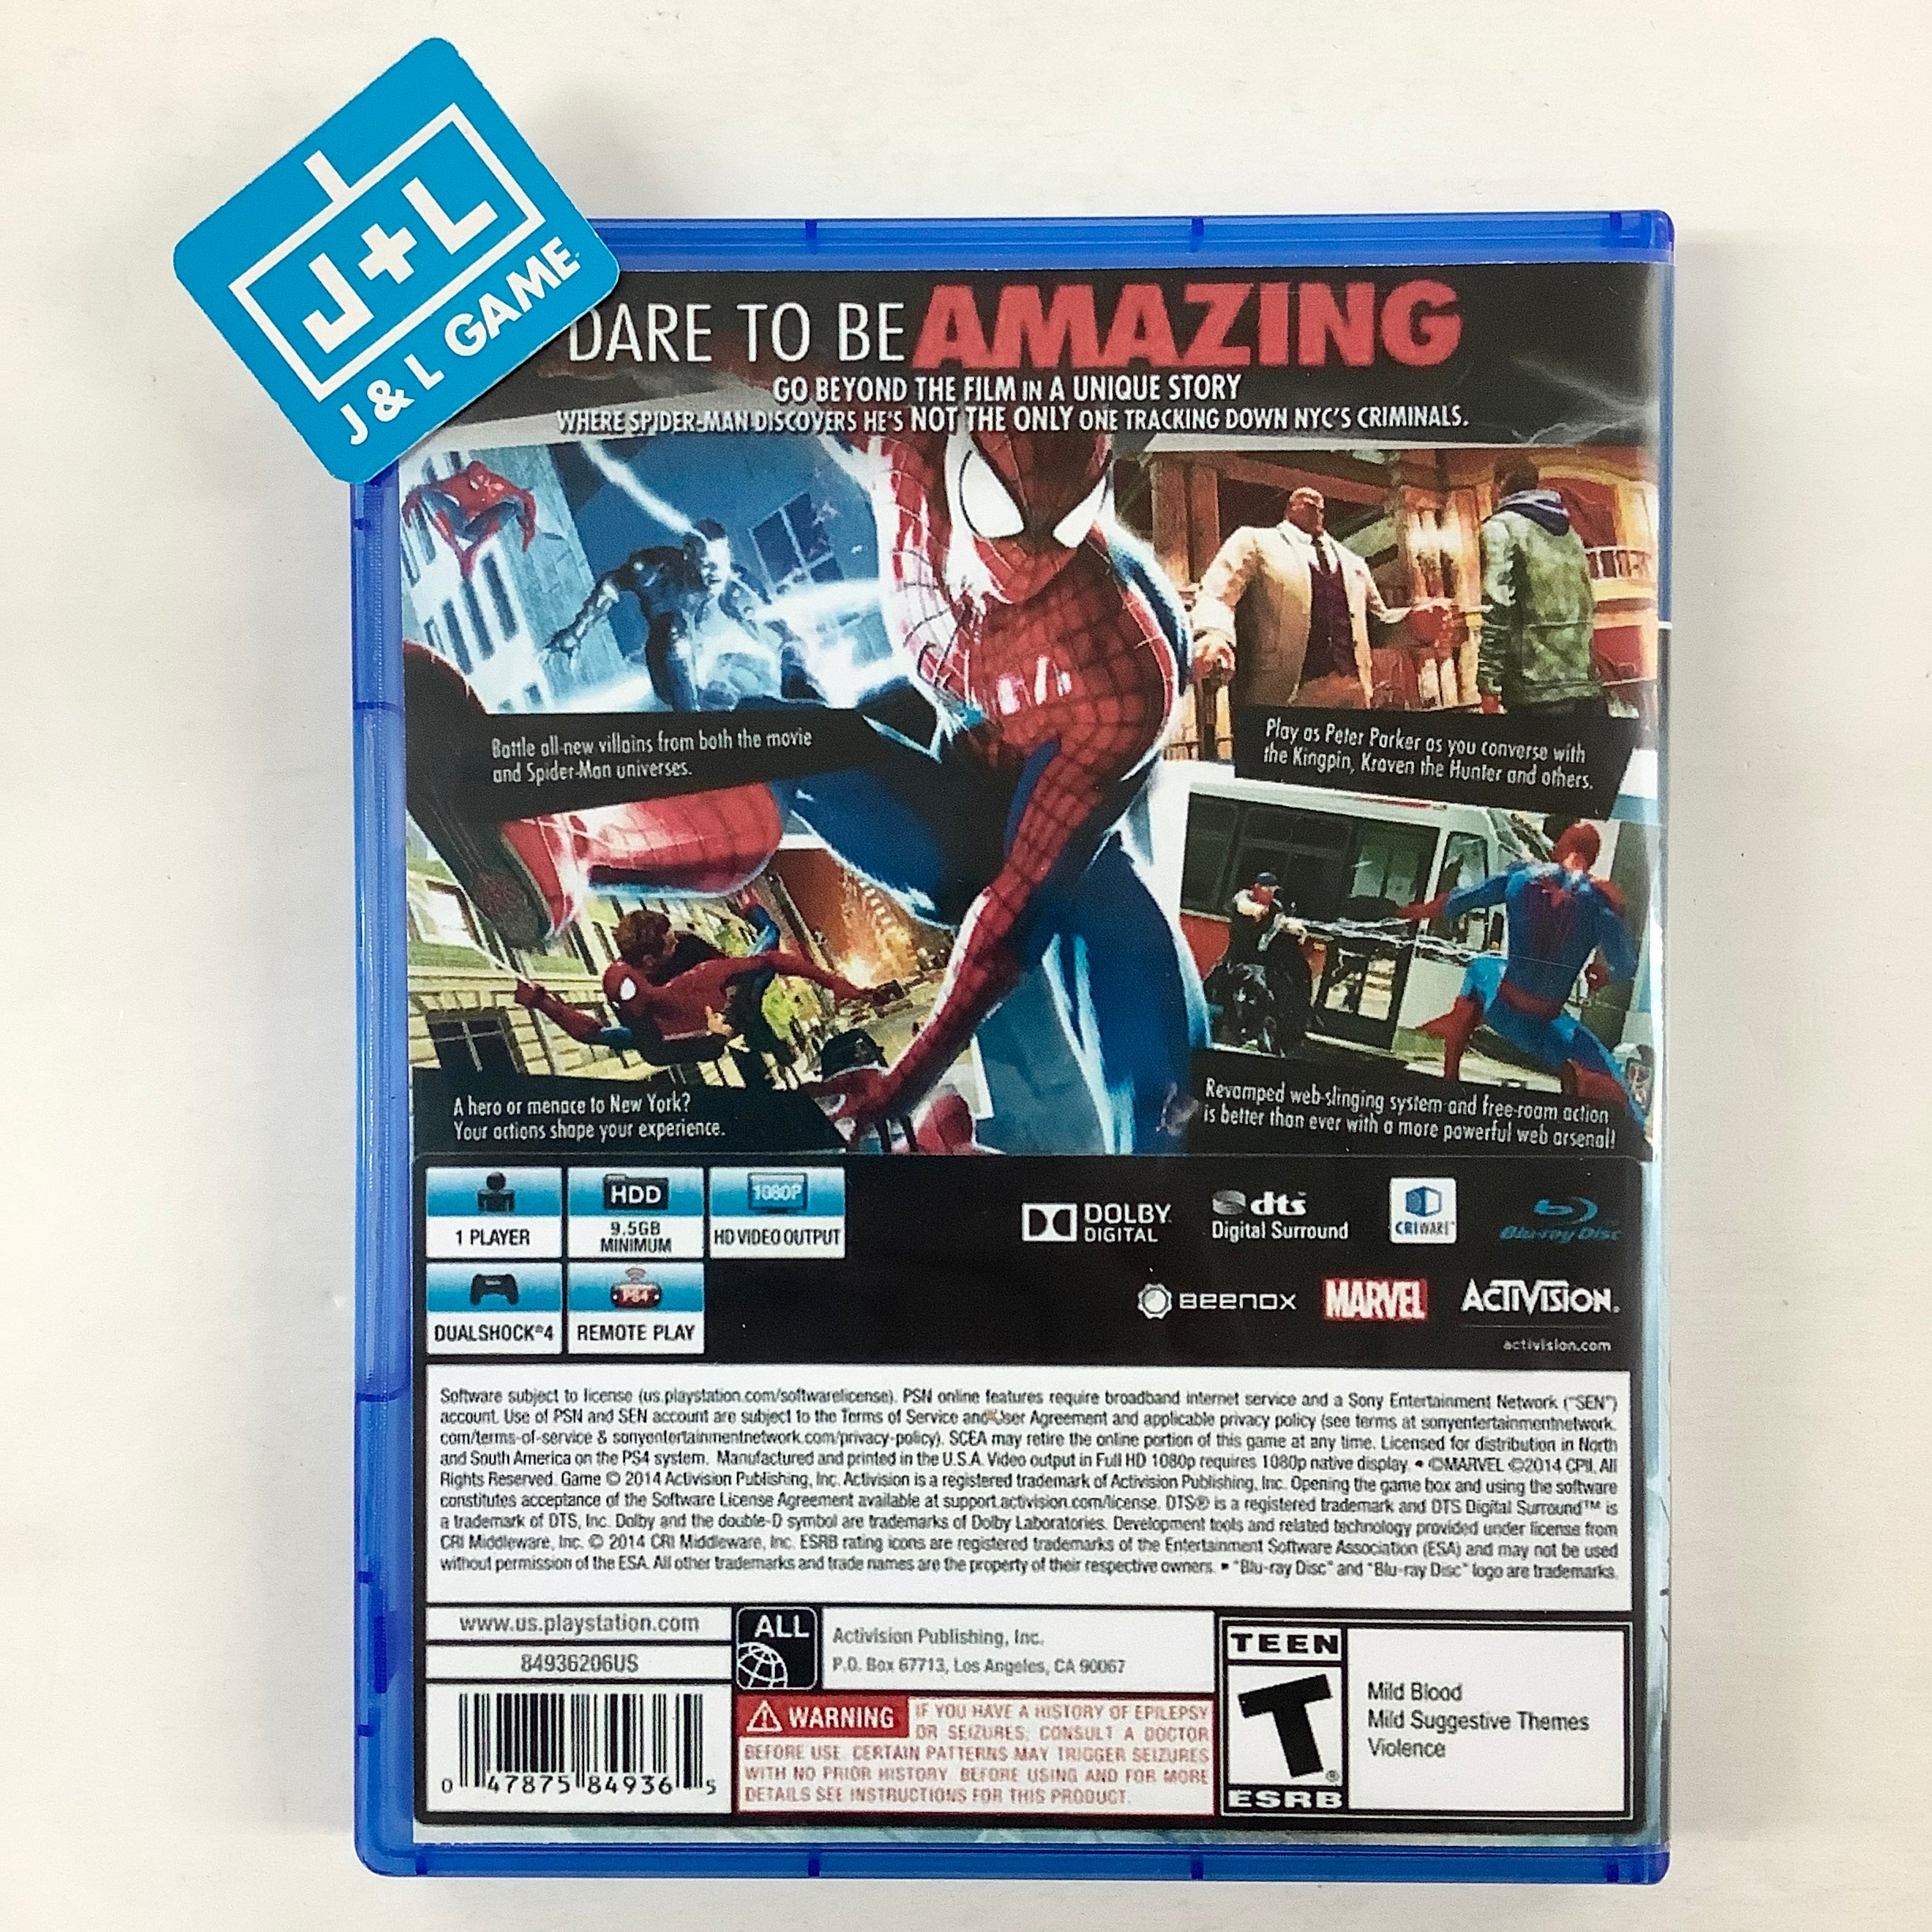 The Amazing Spider-Man 2 - (PS4) PlayStation 4 [Pre-Owned] Video Games Destineer   